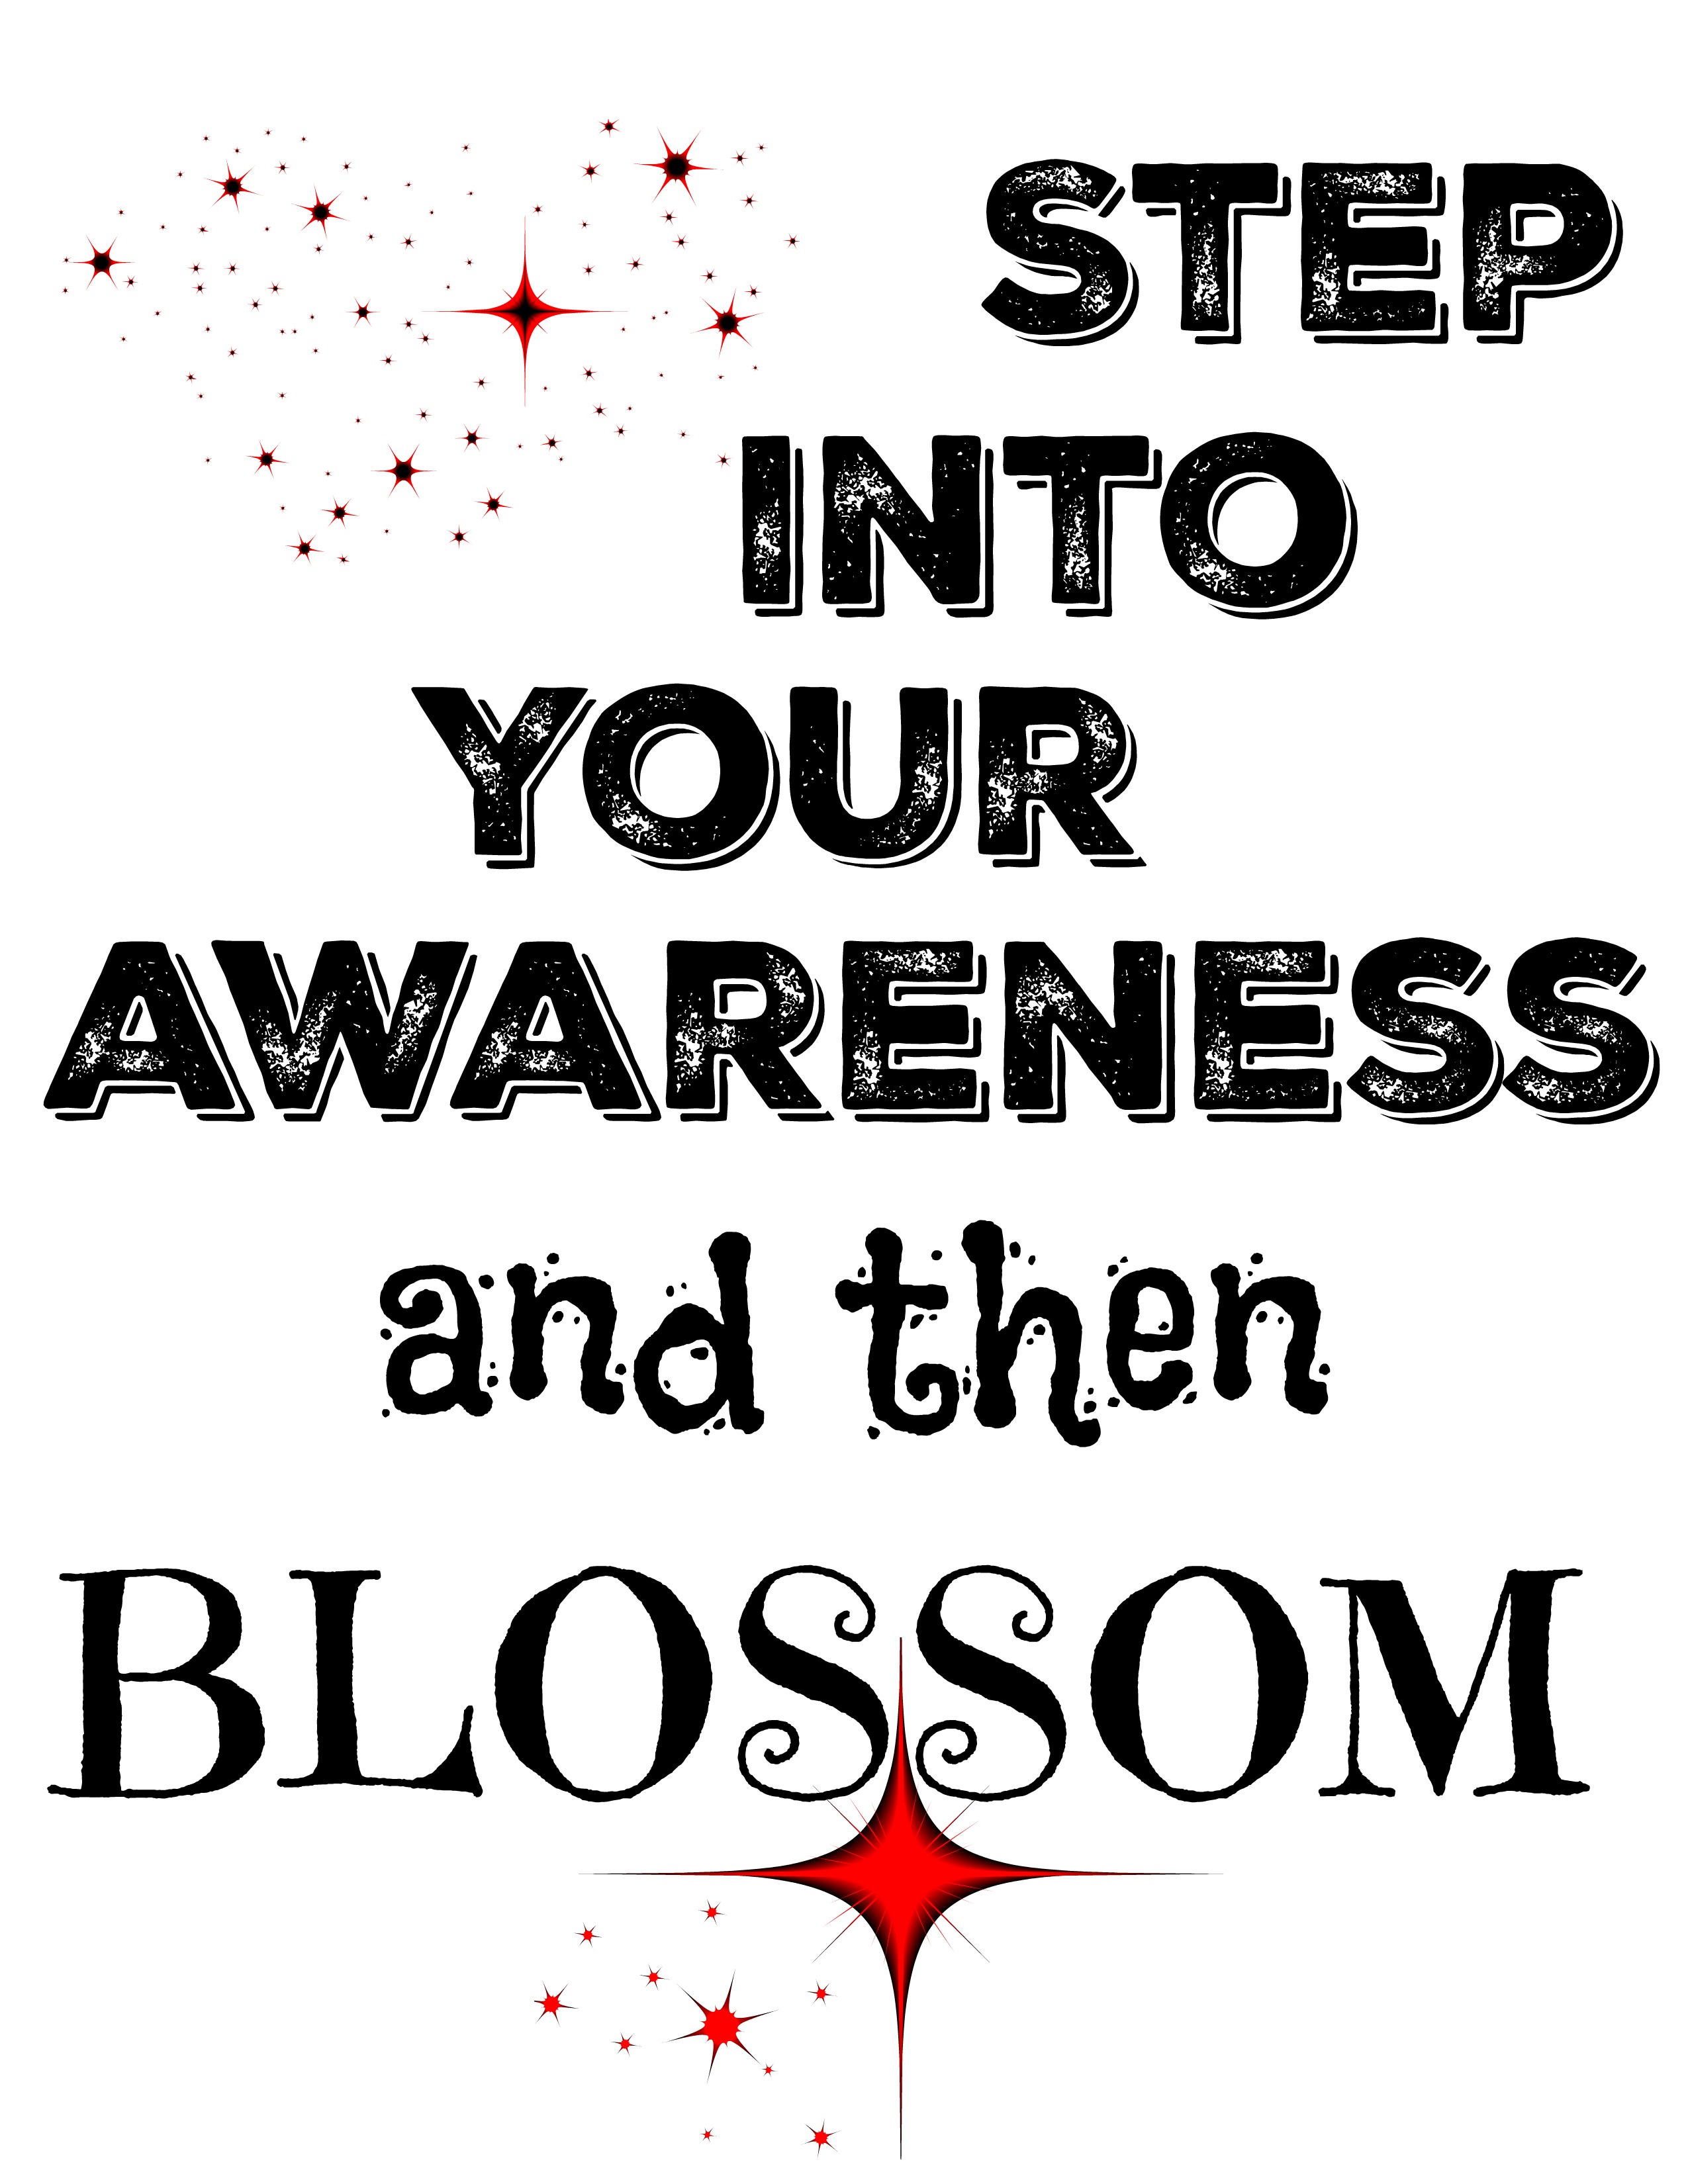 Blossom in 2018! Be your Change Agent!